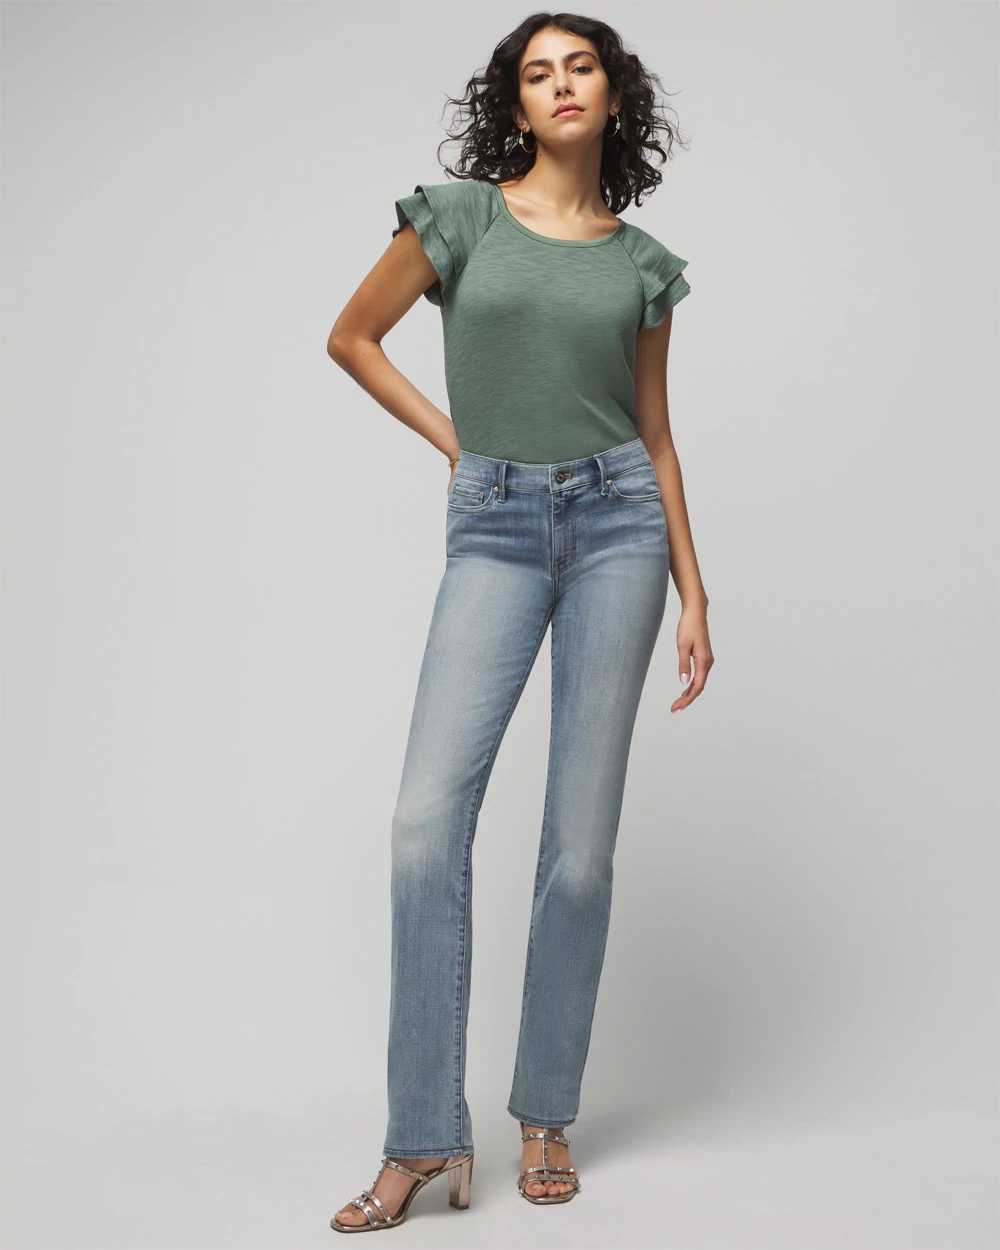 Petite Mid-Rise Everyday Soft Denim  Bootcut Jeans click to view larger image.